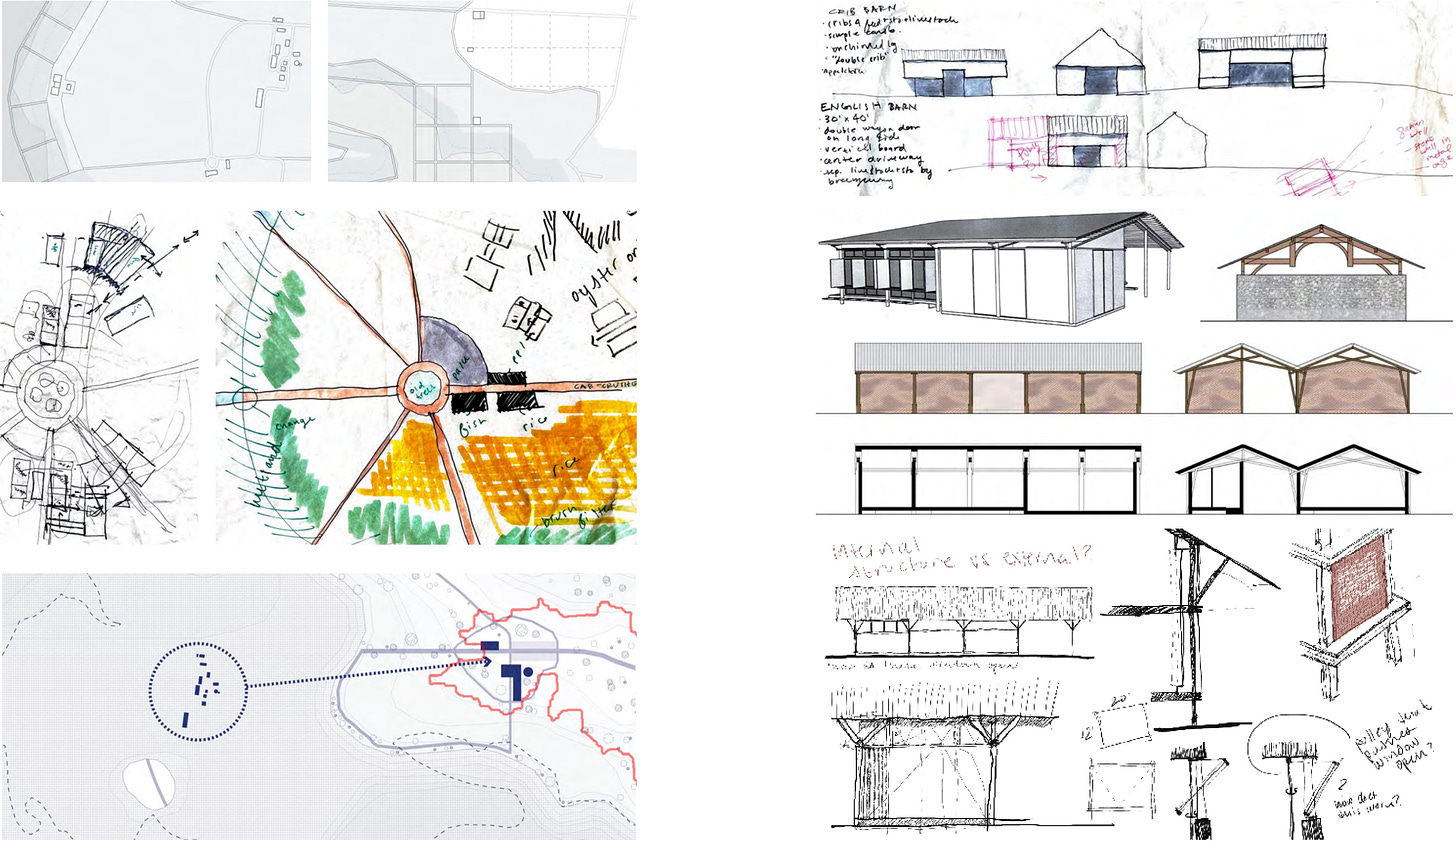 Architectural diagrams - site plans, building forms, and notes